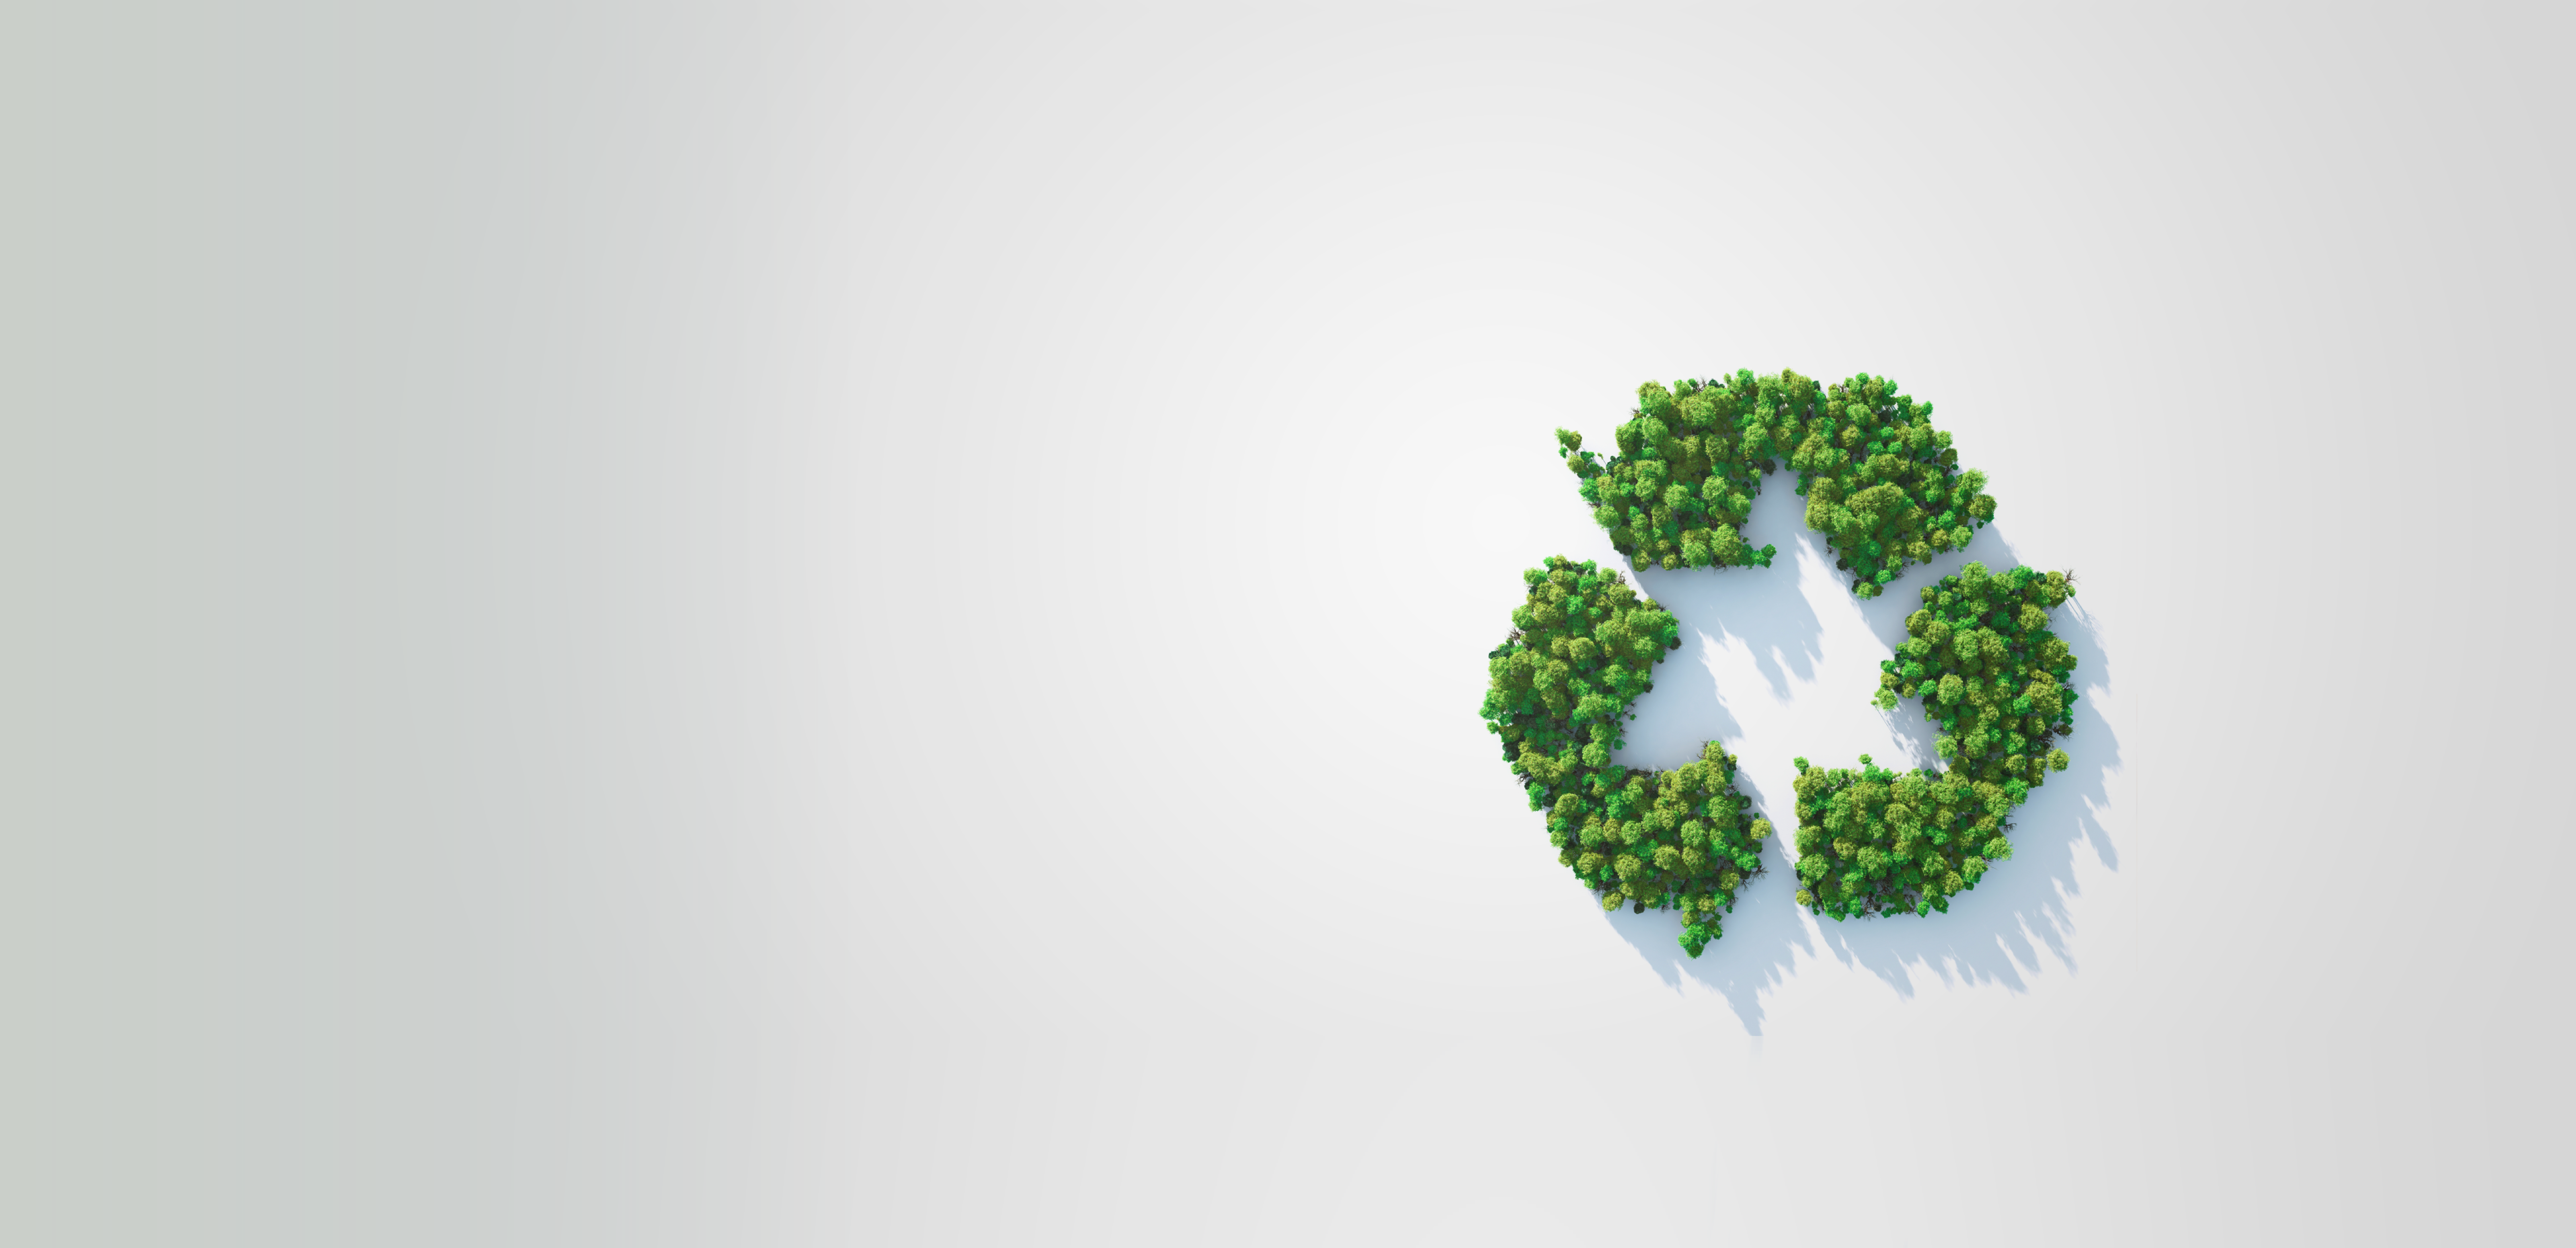 Artistic design of recycling symbol with trees